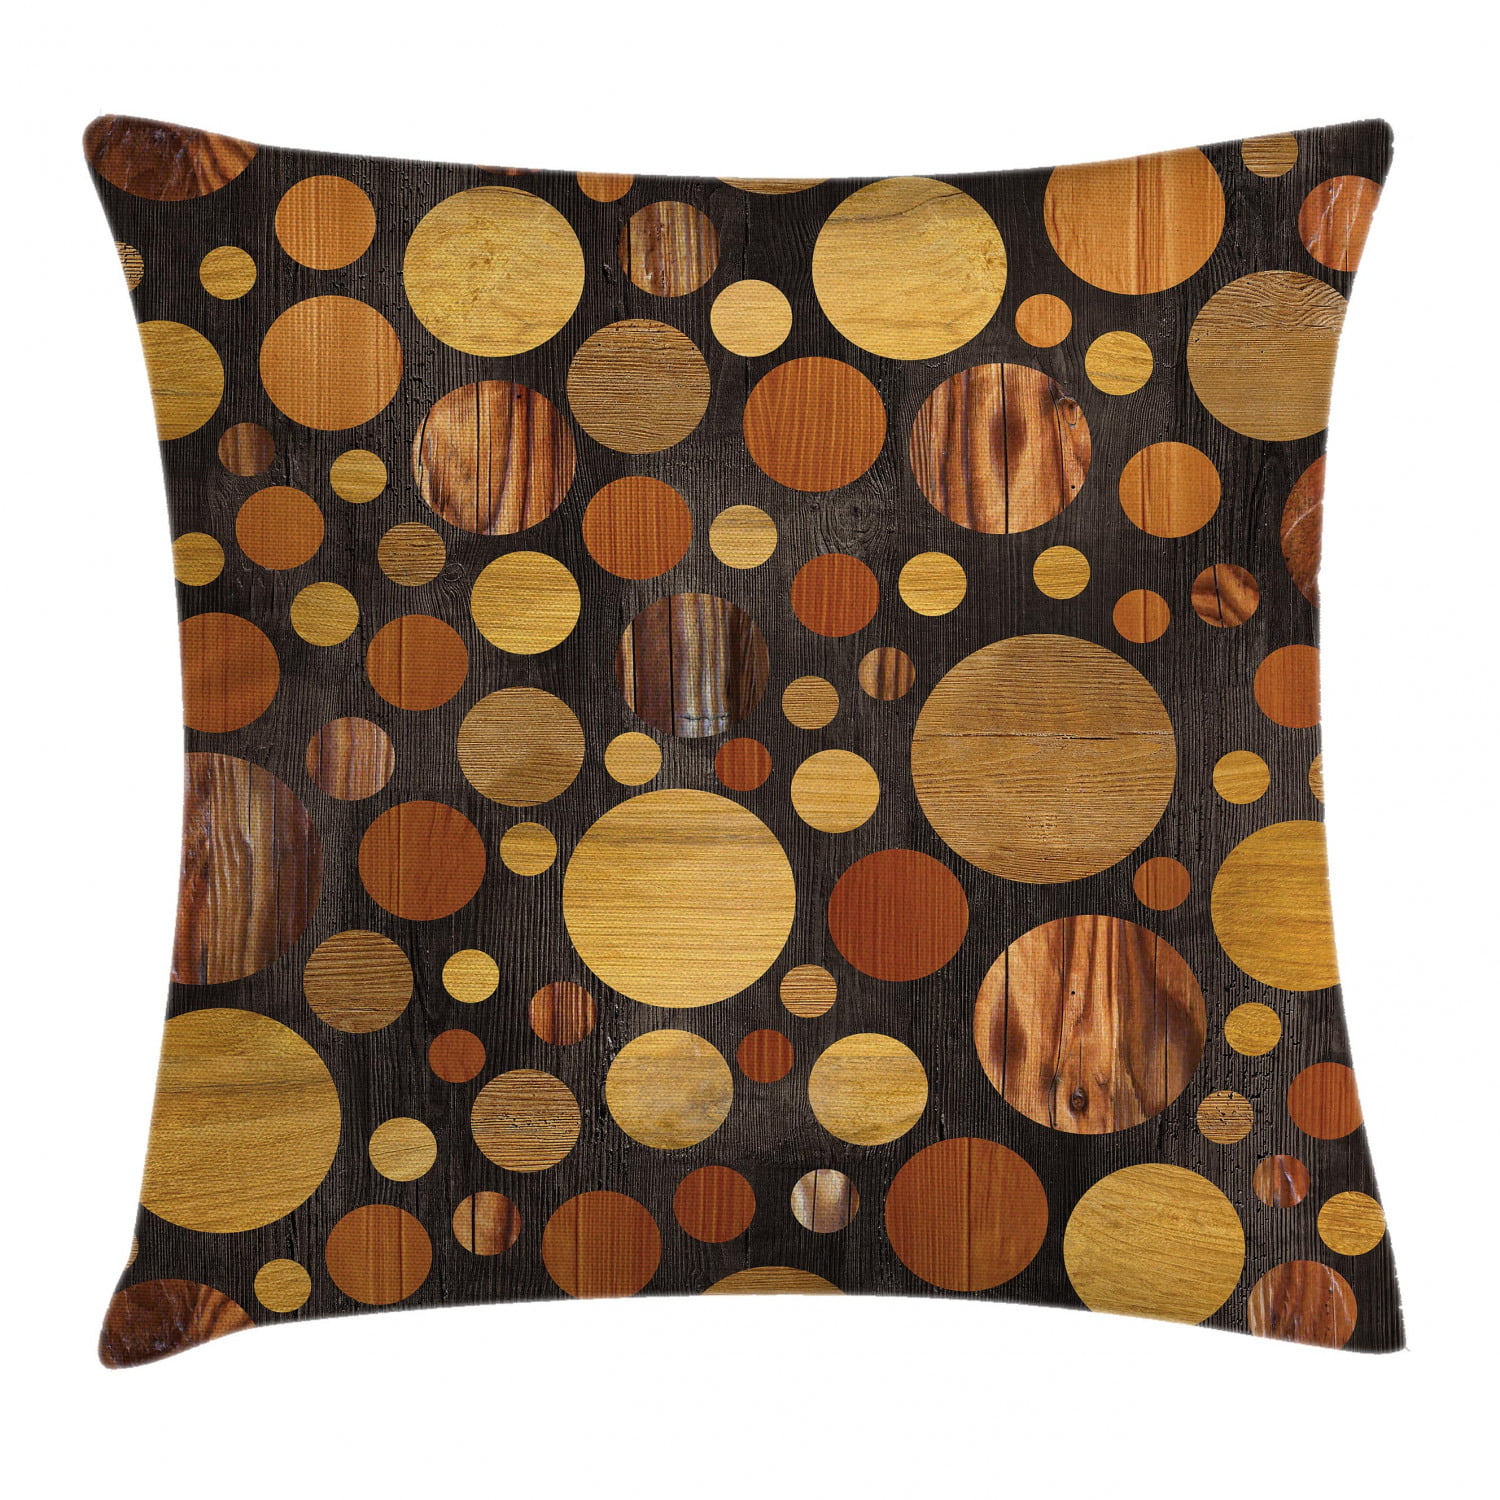 16 X 16 Antlers in Wild Alaska Forest Rusty Abstract Landscape Design Deer Theme Woods Peach Brown Decorative Square Accent Pillow Case Ambesonne Moose Throw Pillow Cushion Cover